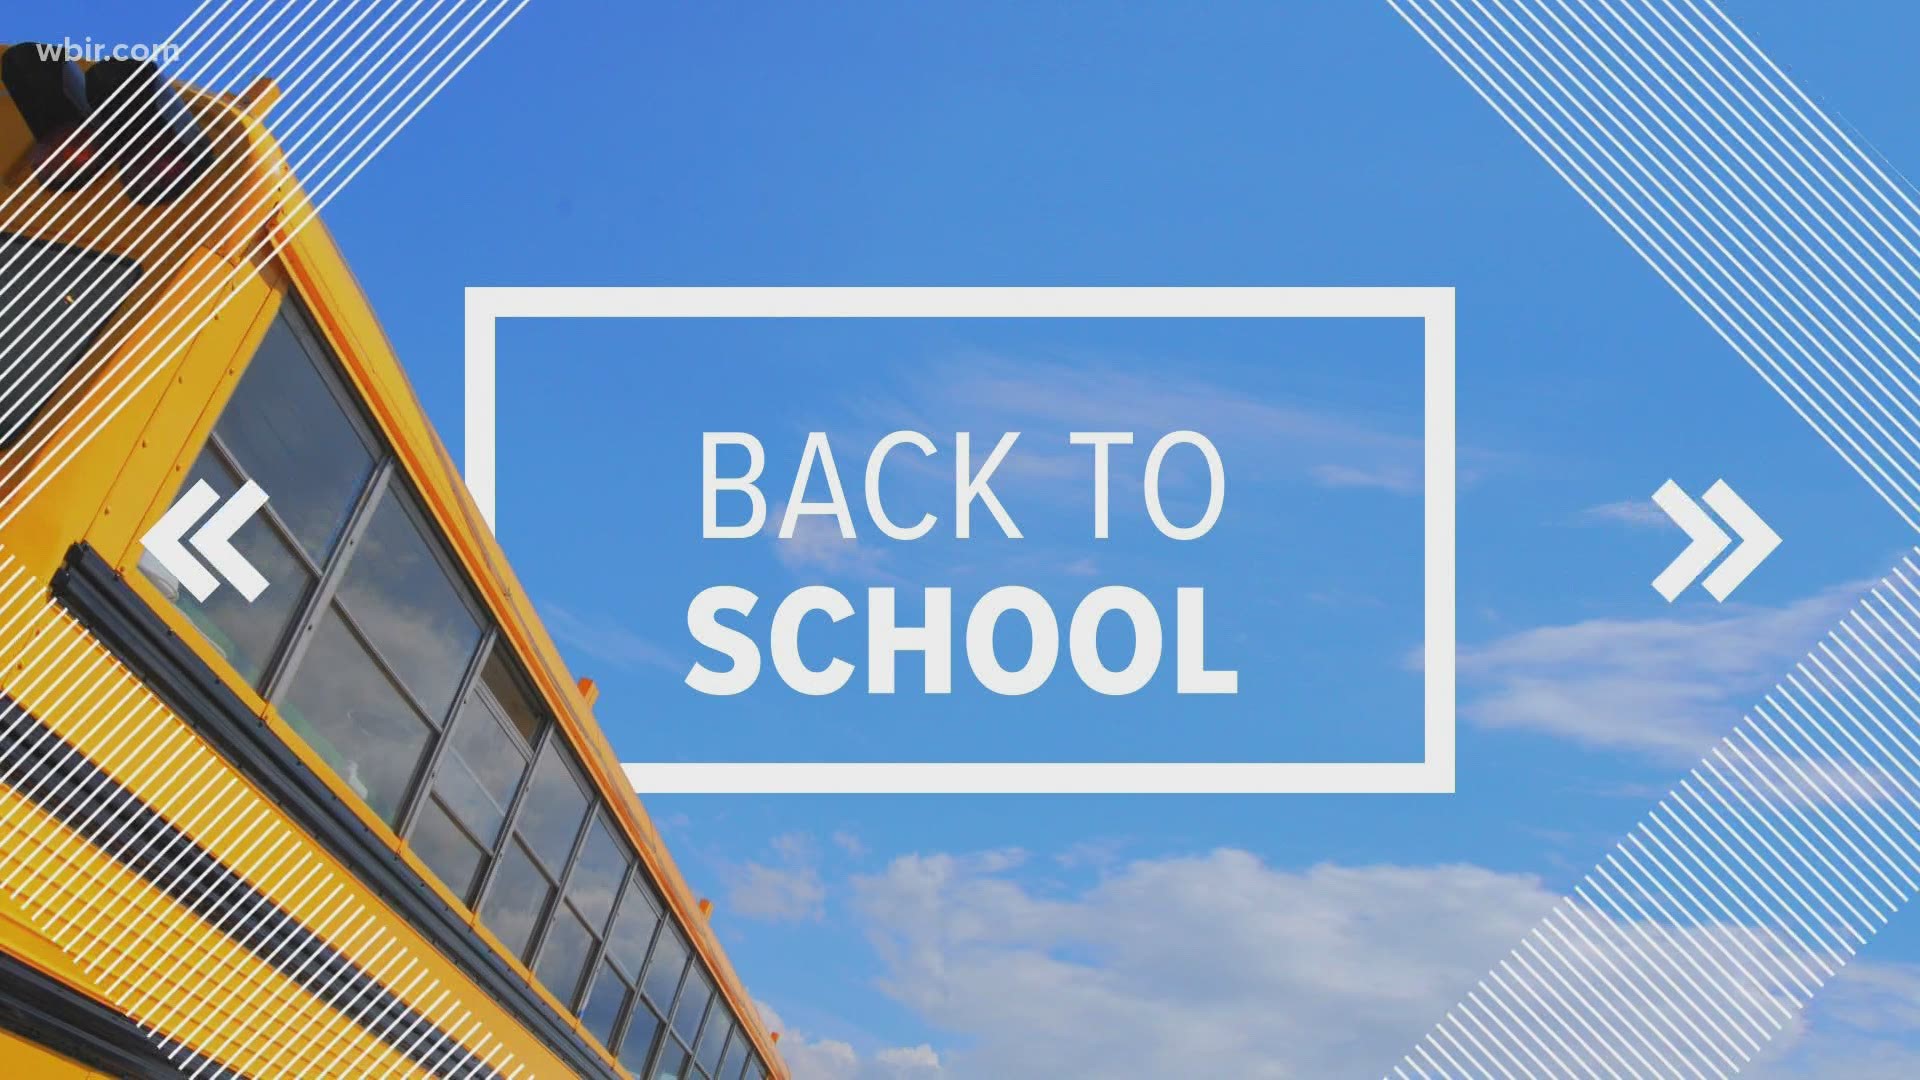 Alcoa High School students will be heading back to school on Wednesday!